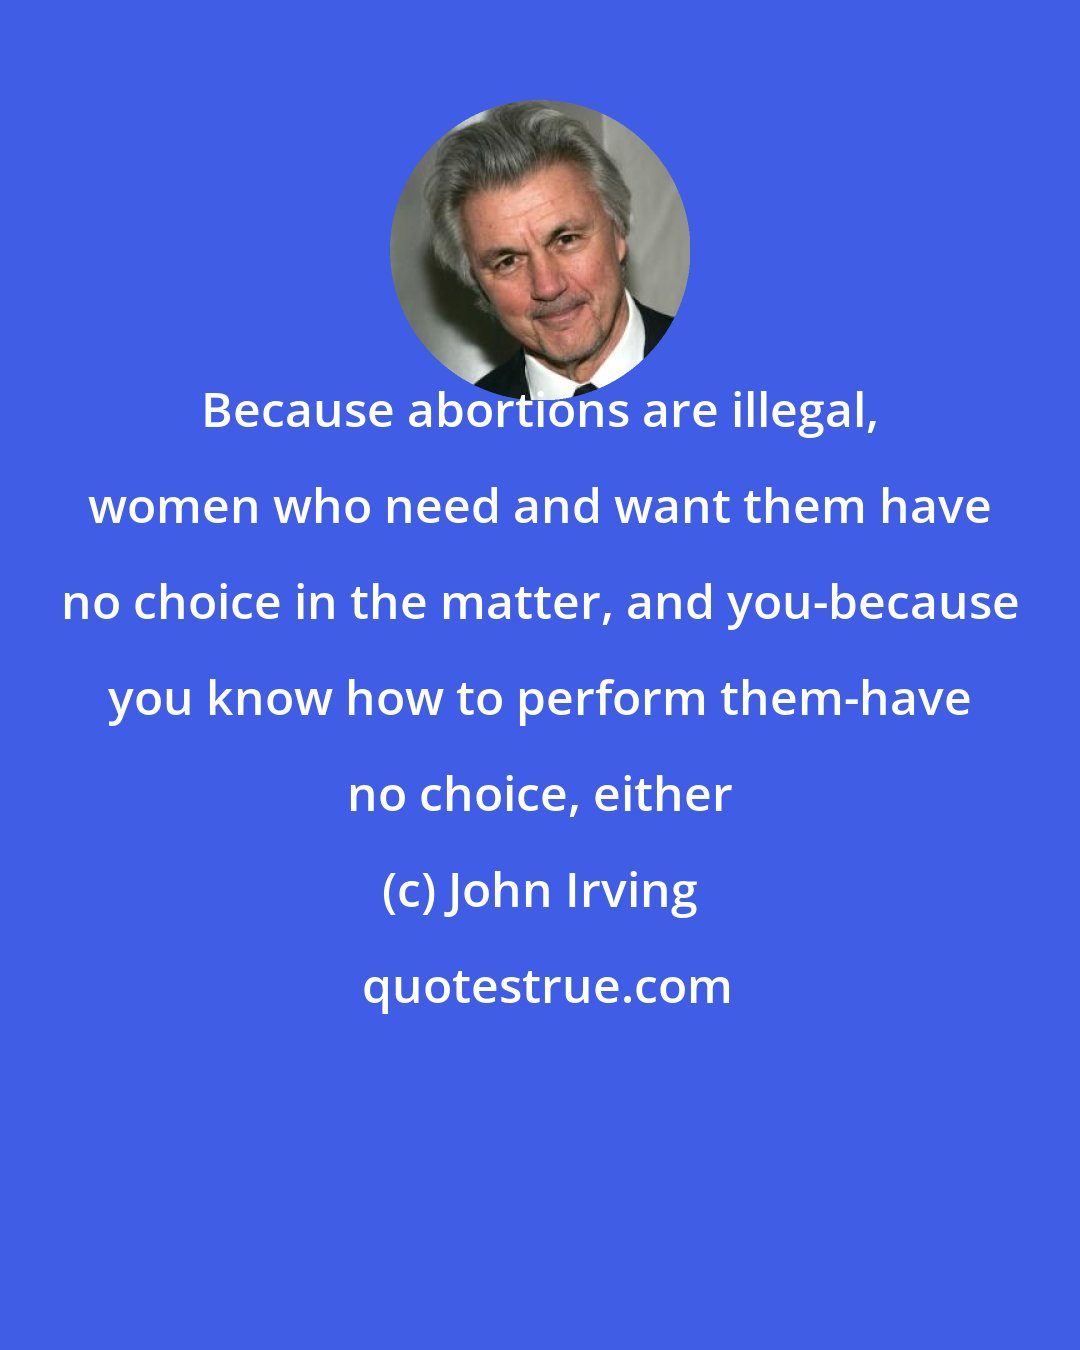 John Irving: Because abortions are illegal, women who need and want them have no choice in the matter, and you-because you know how to perform them-have no choice, either